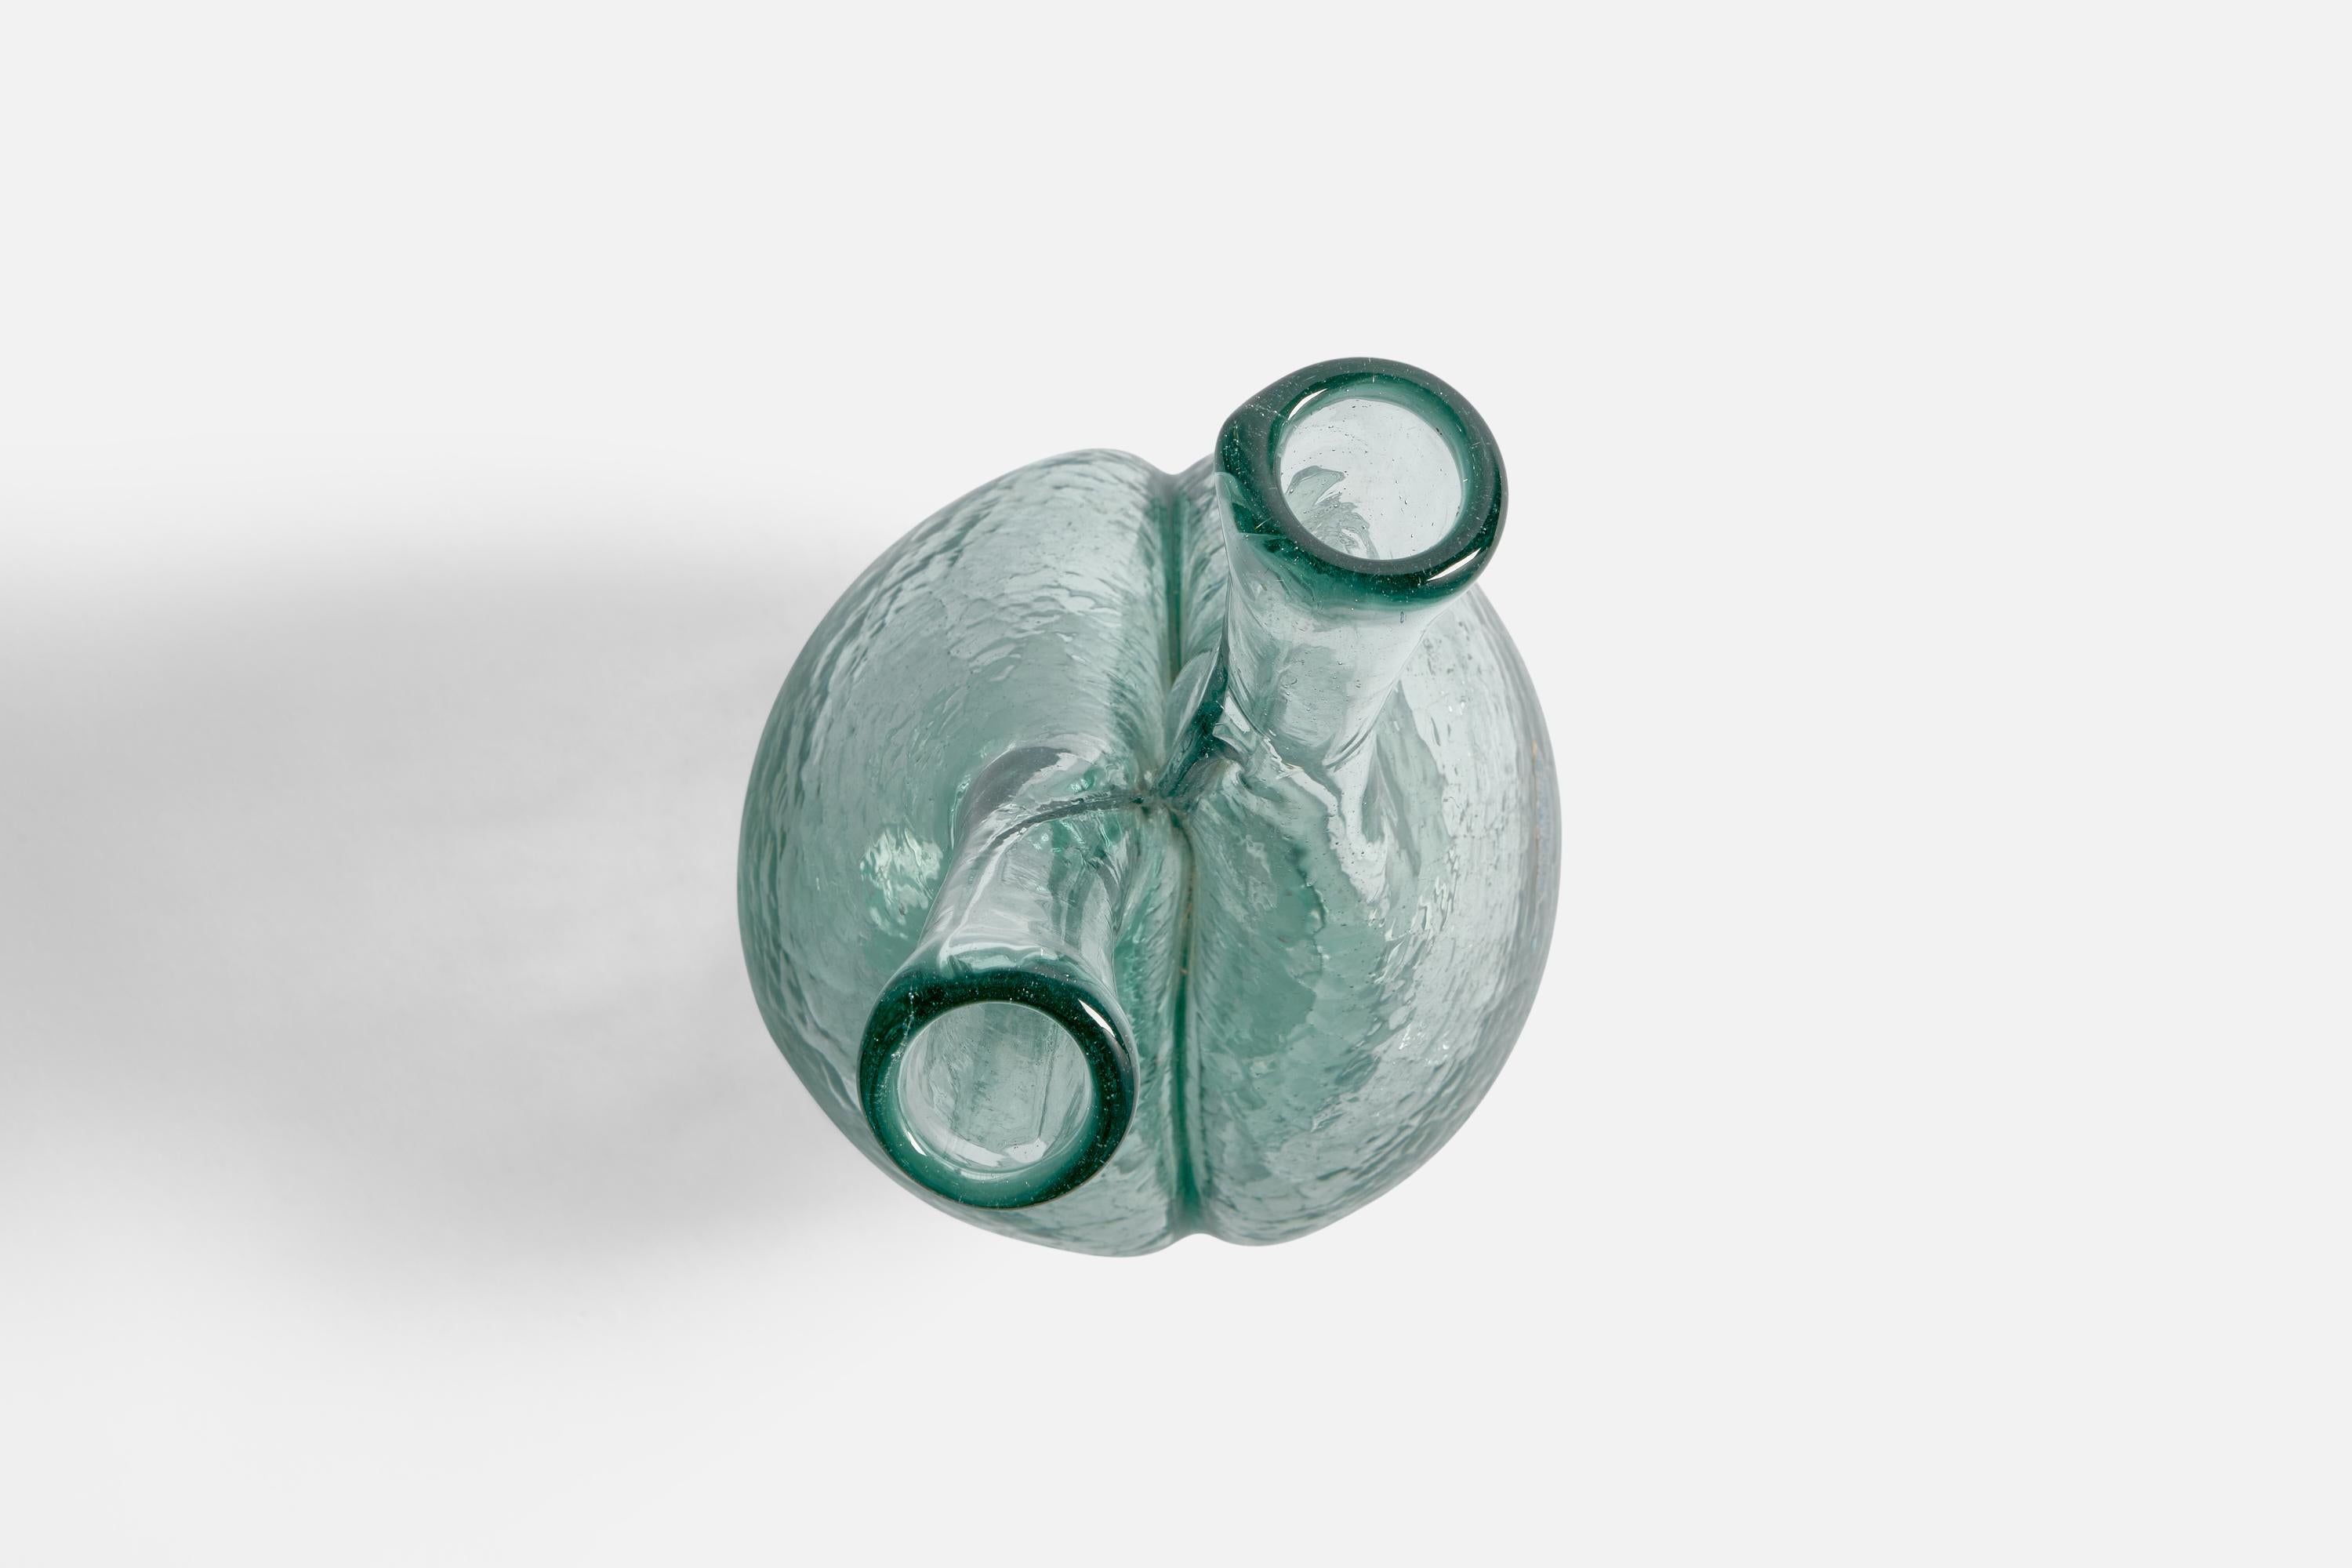 Blown Glass Ture Berglund, Bottle, Glass, Sweden, 1940s For Sale